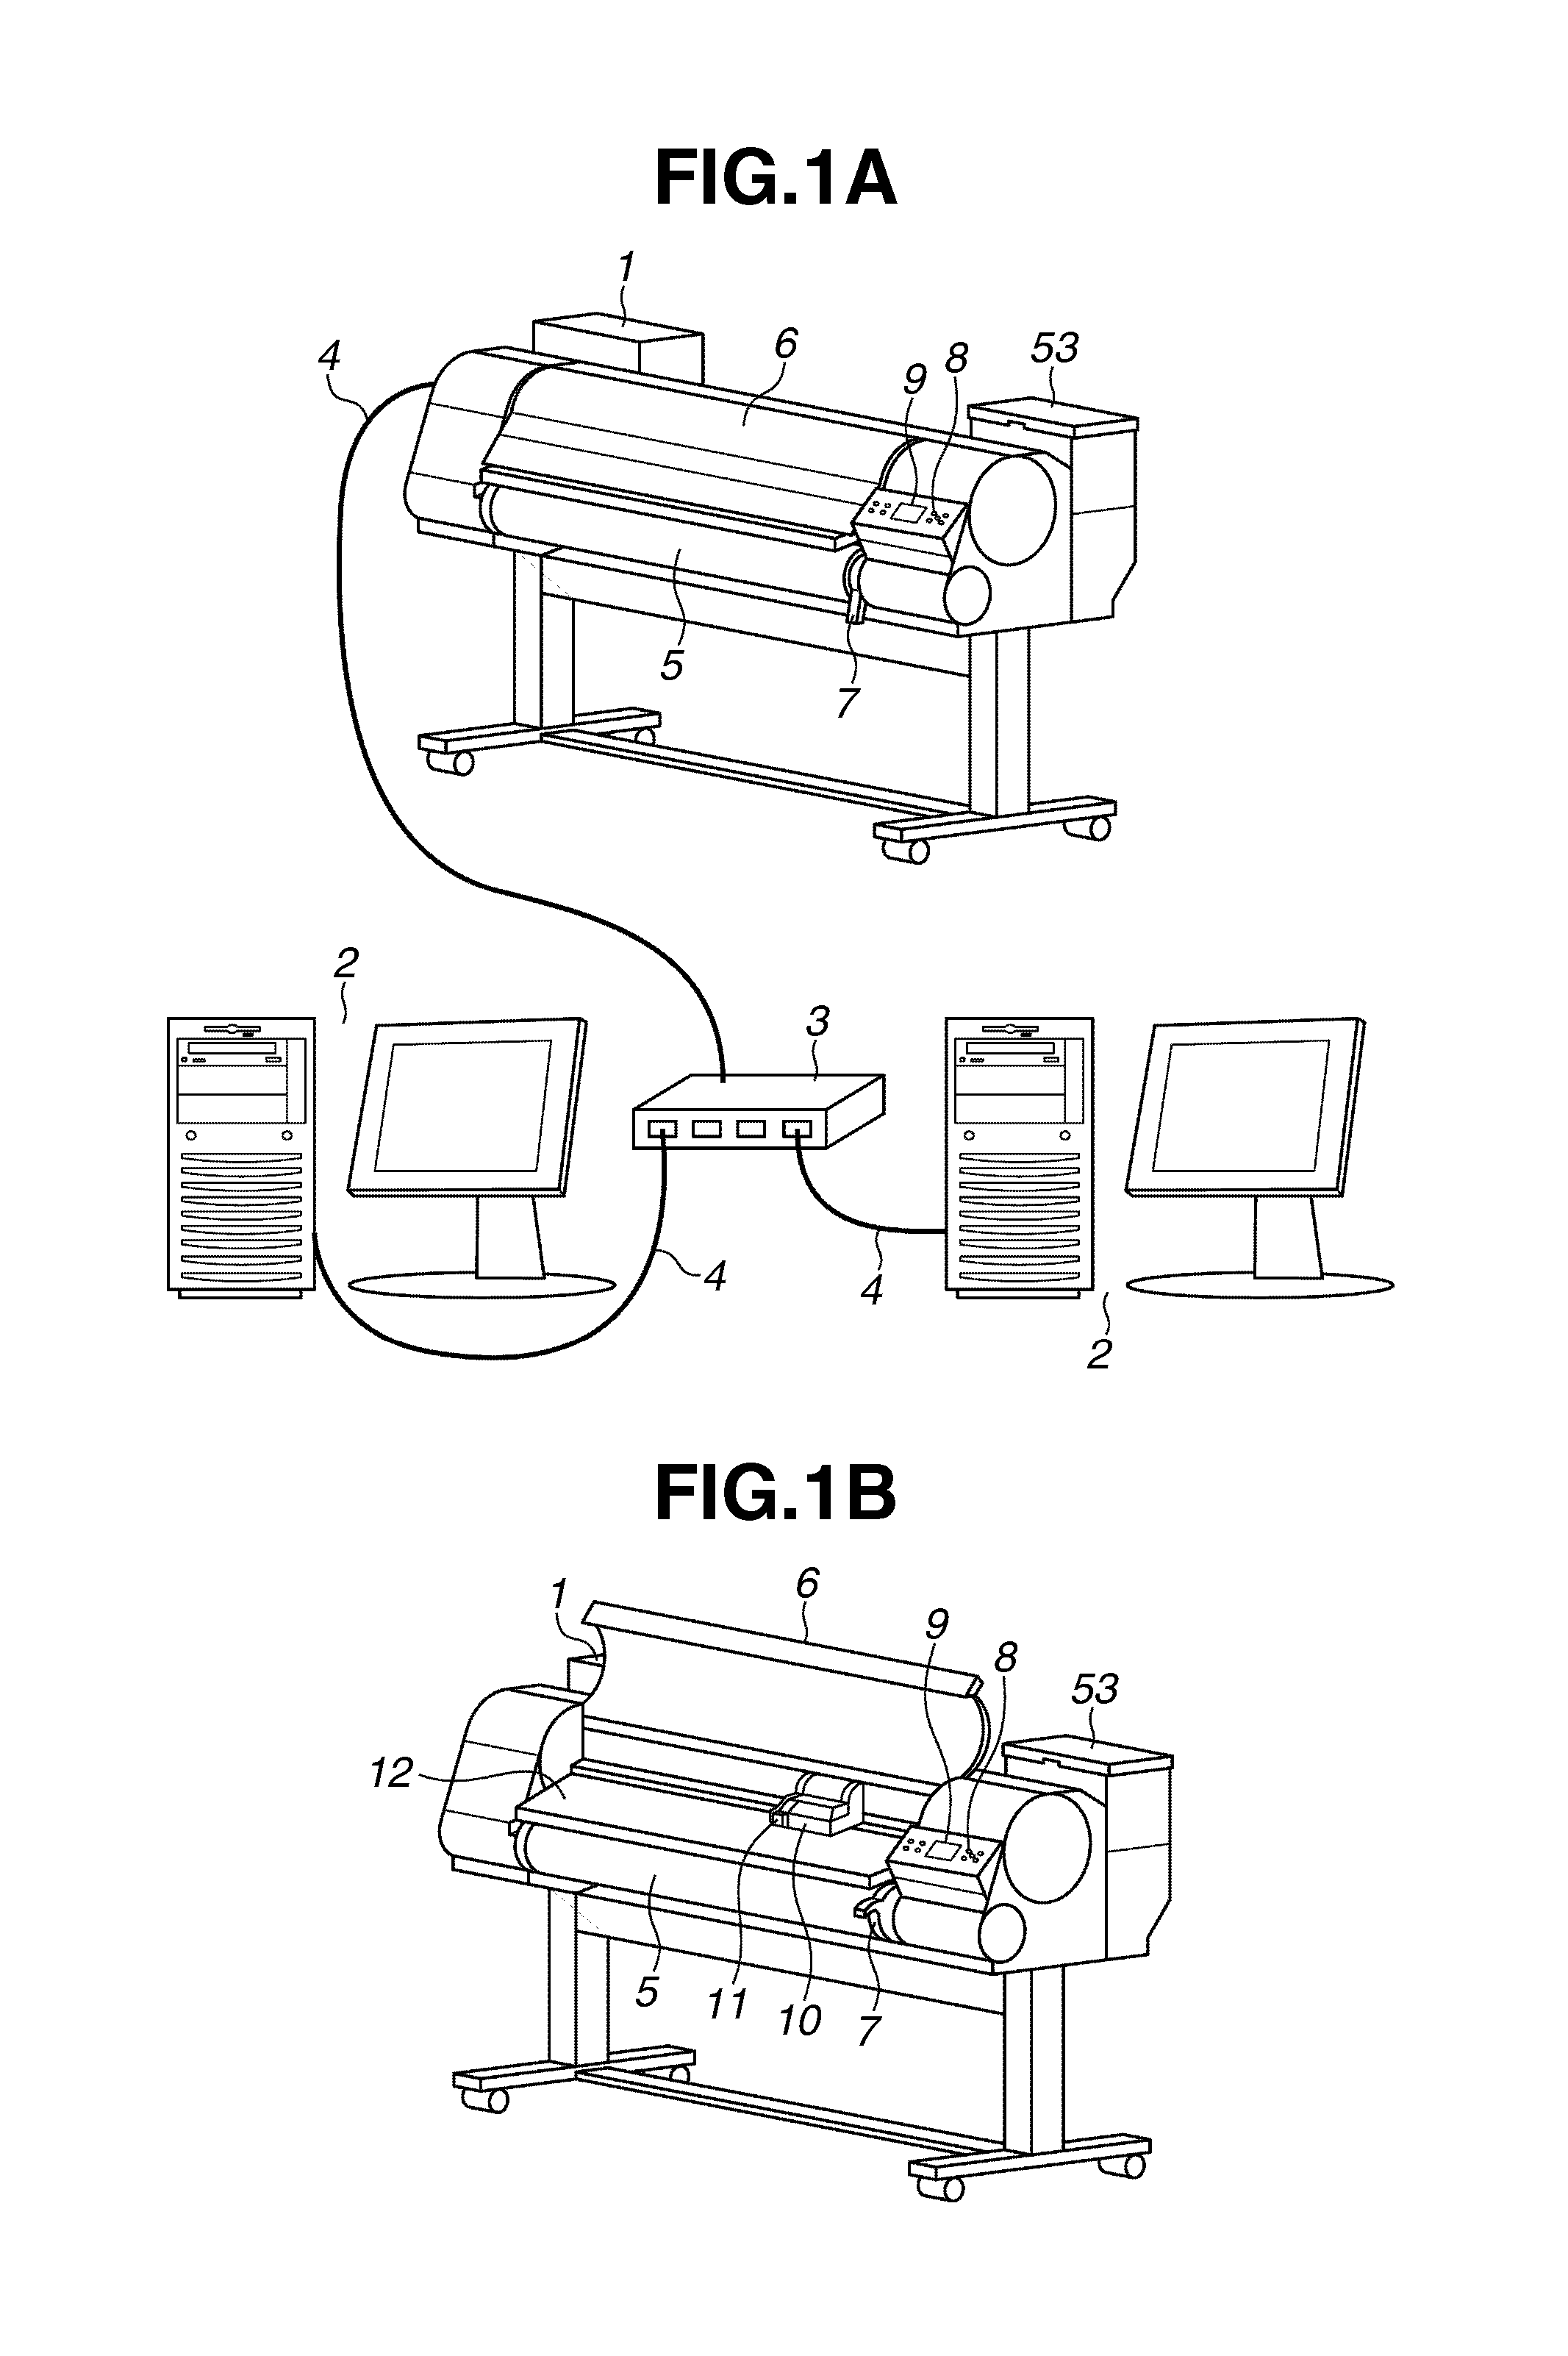 Printing apparatus with cut unit configured to cut a sheet according to an operator's instructions